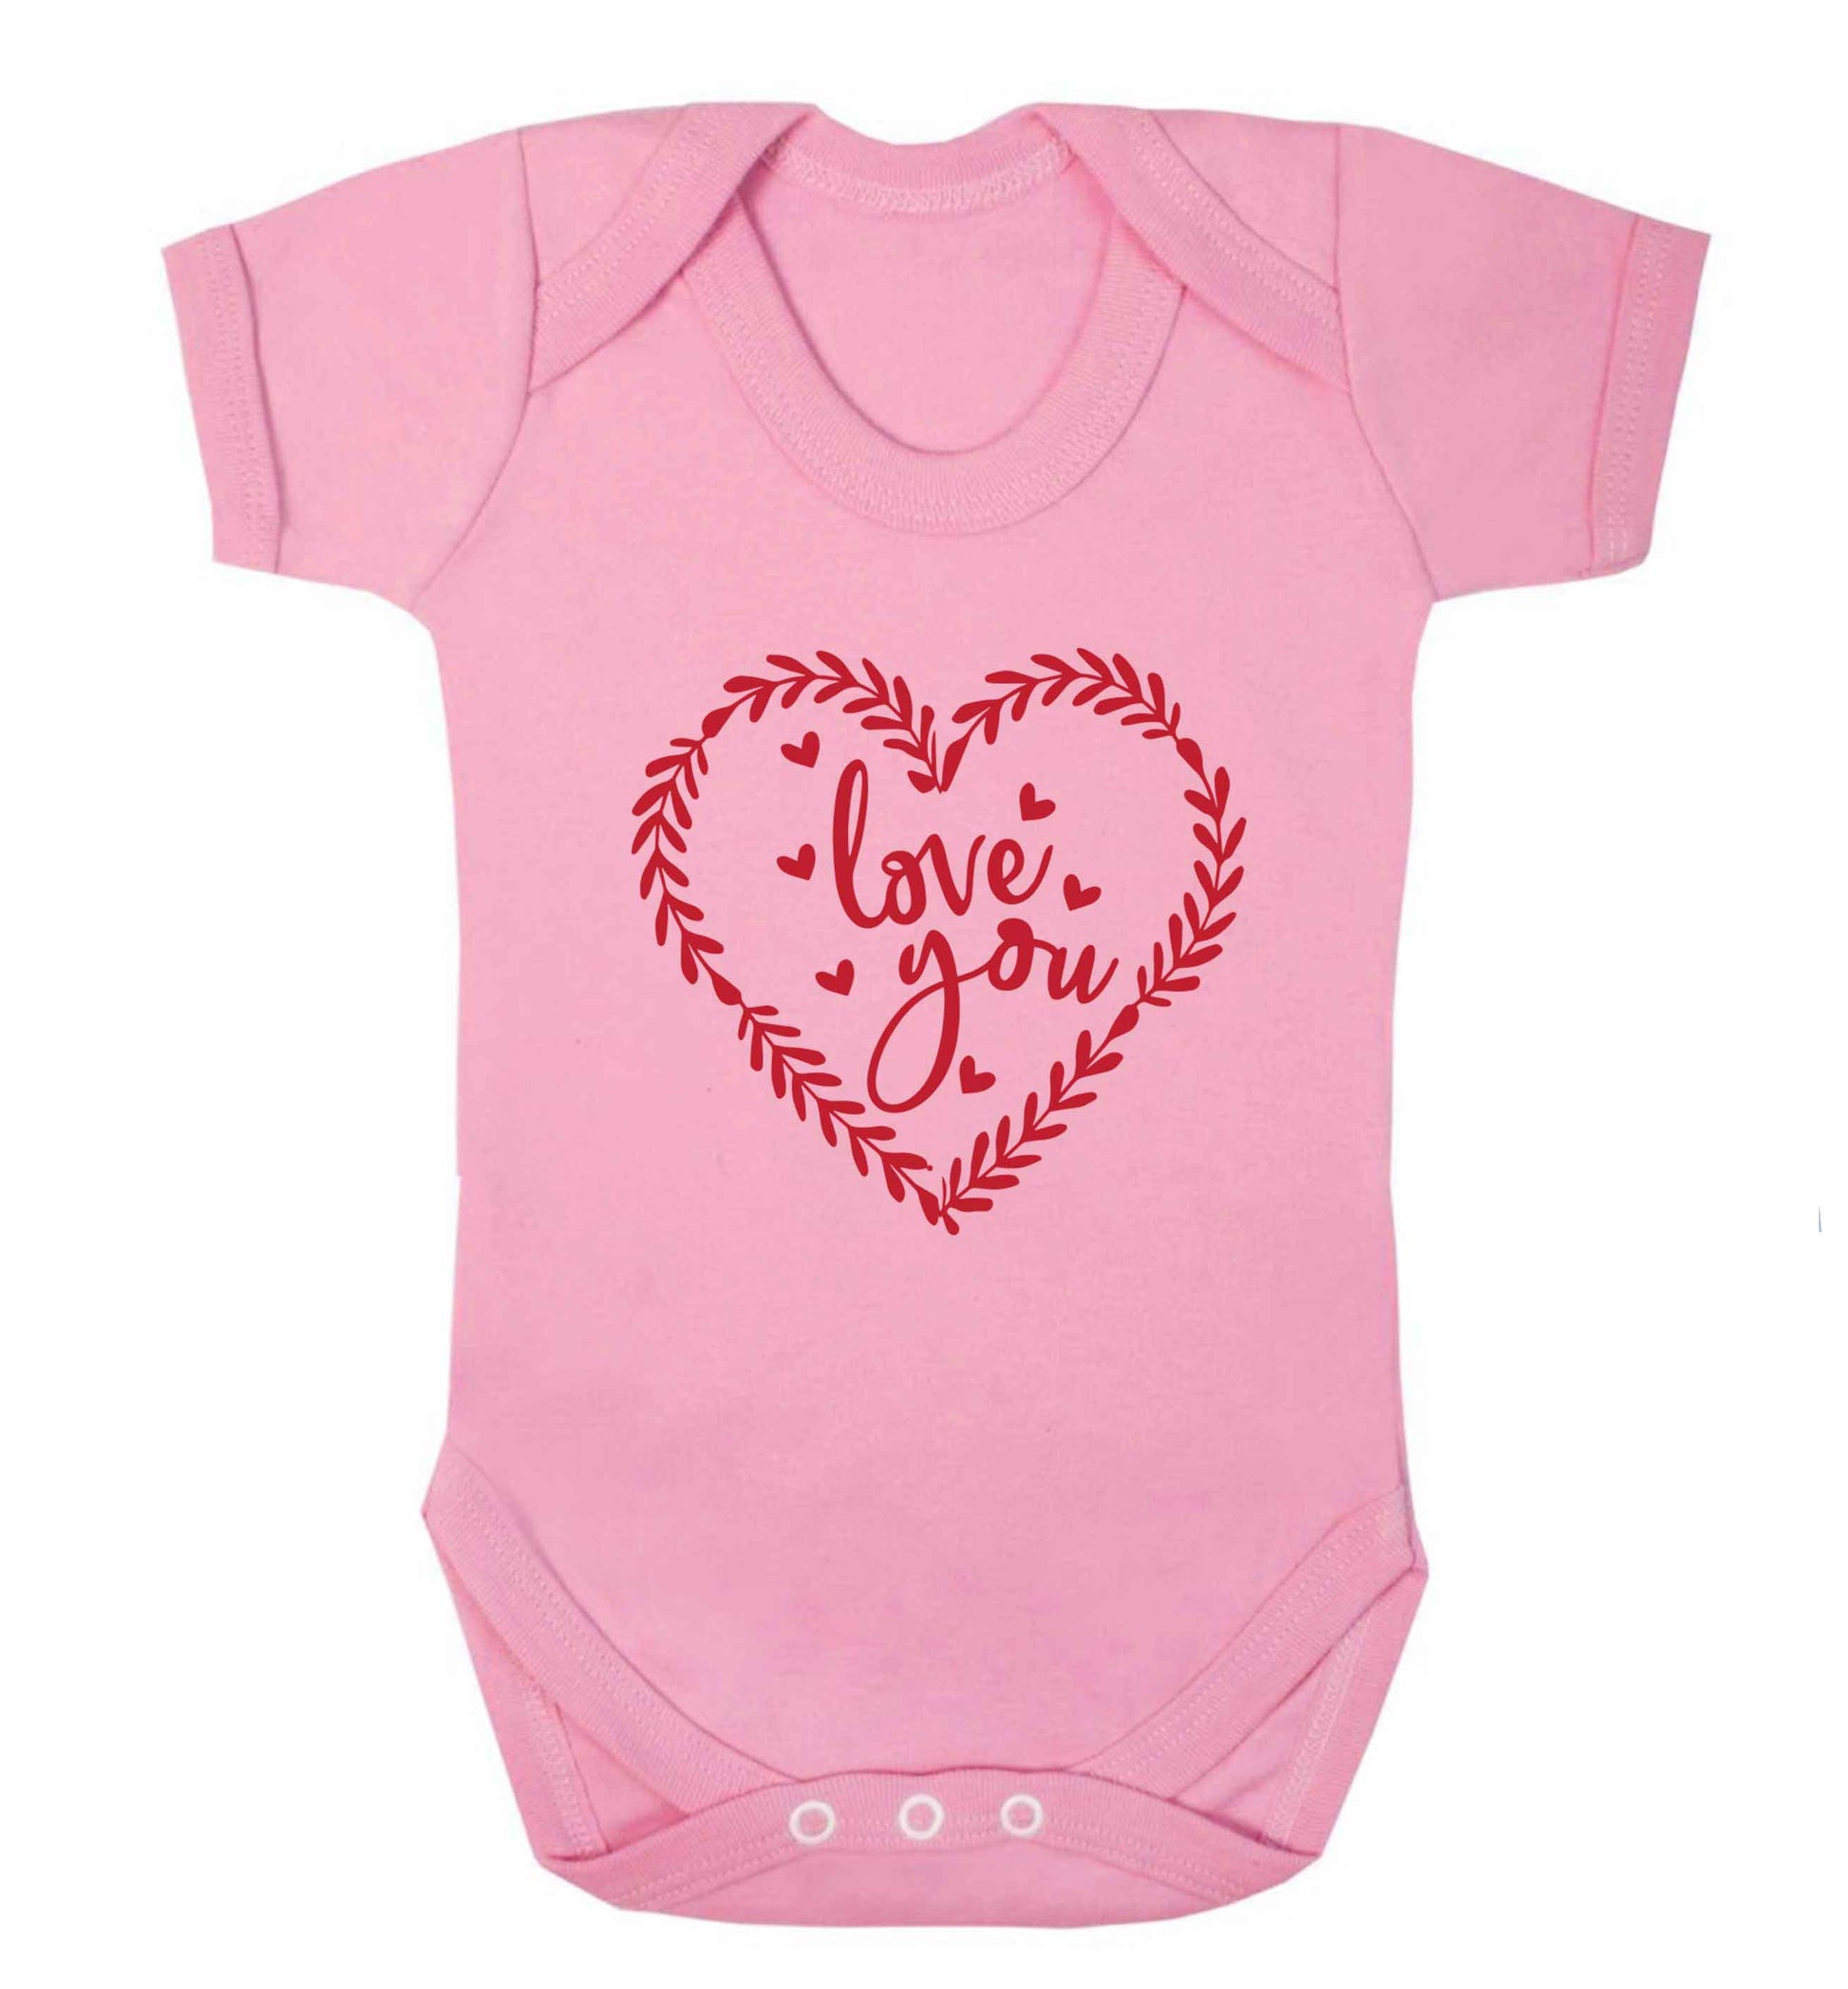 Love you baby vest pale pink 18-24 months